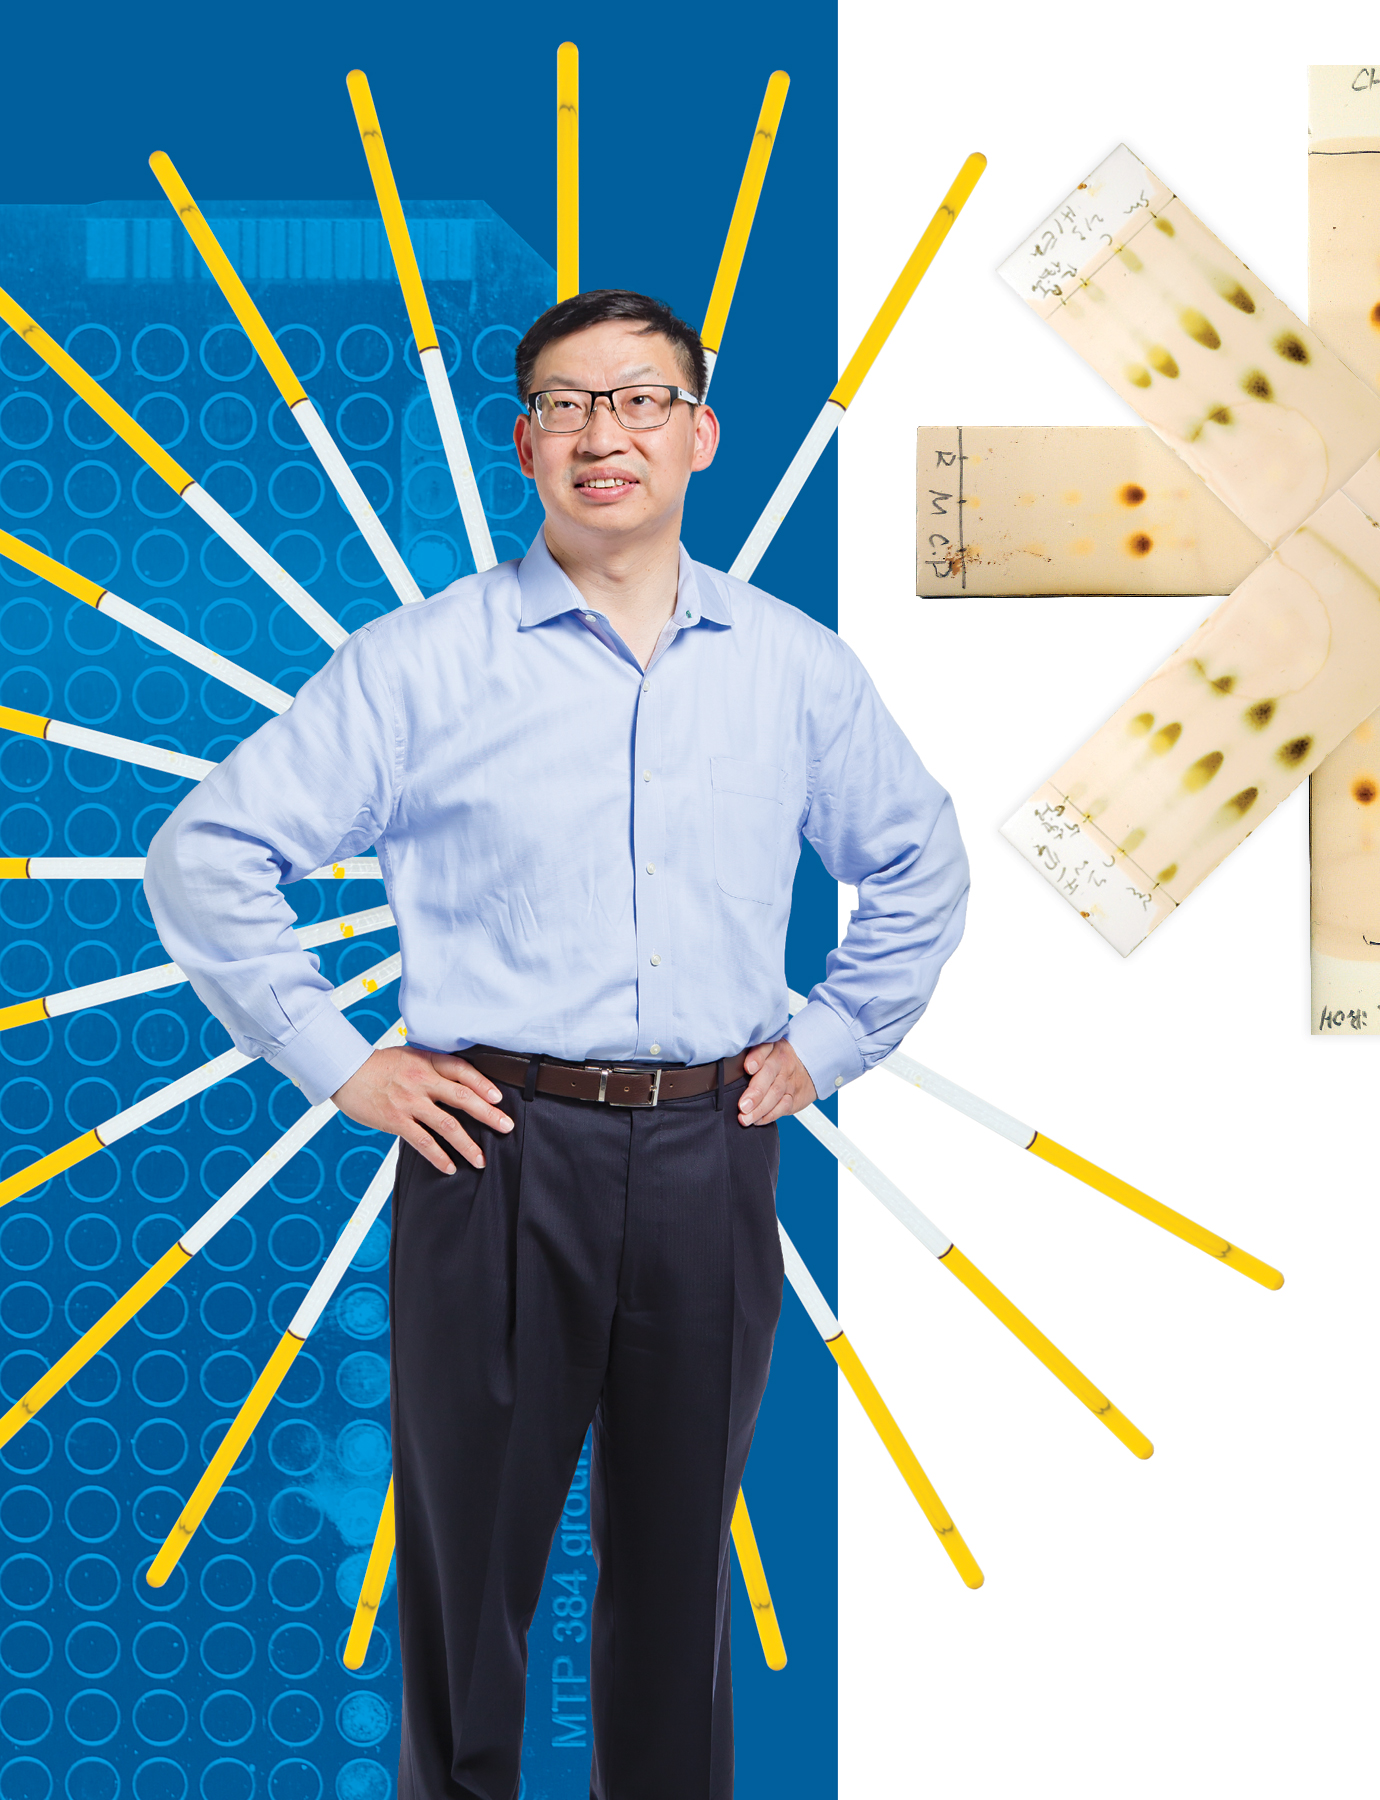 A photo illustration of Lai-Xi Wang. He is wearing a blue business shirt and black pants. He is standing with his hands on his hips, looking off into the distance. Behind him is a collage of pipettes, a sample plate tited royal blue, and a group paper stain samples arranged like an asterix.